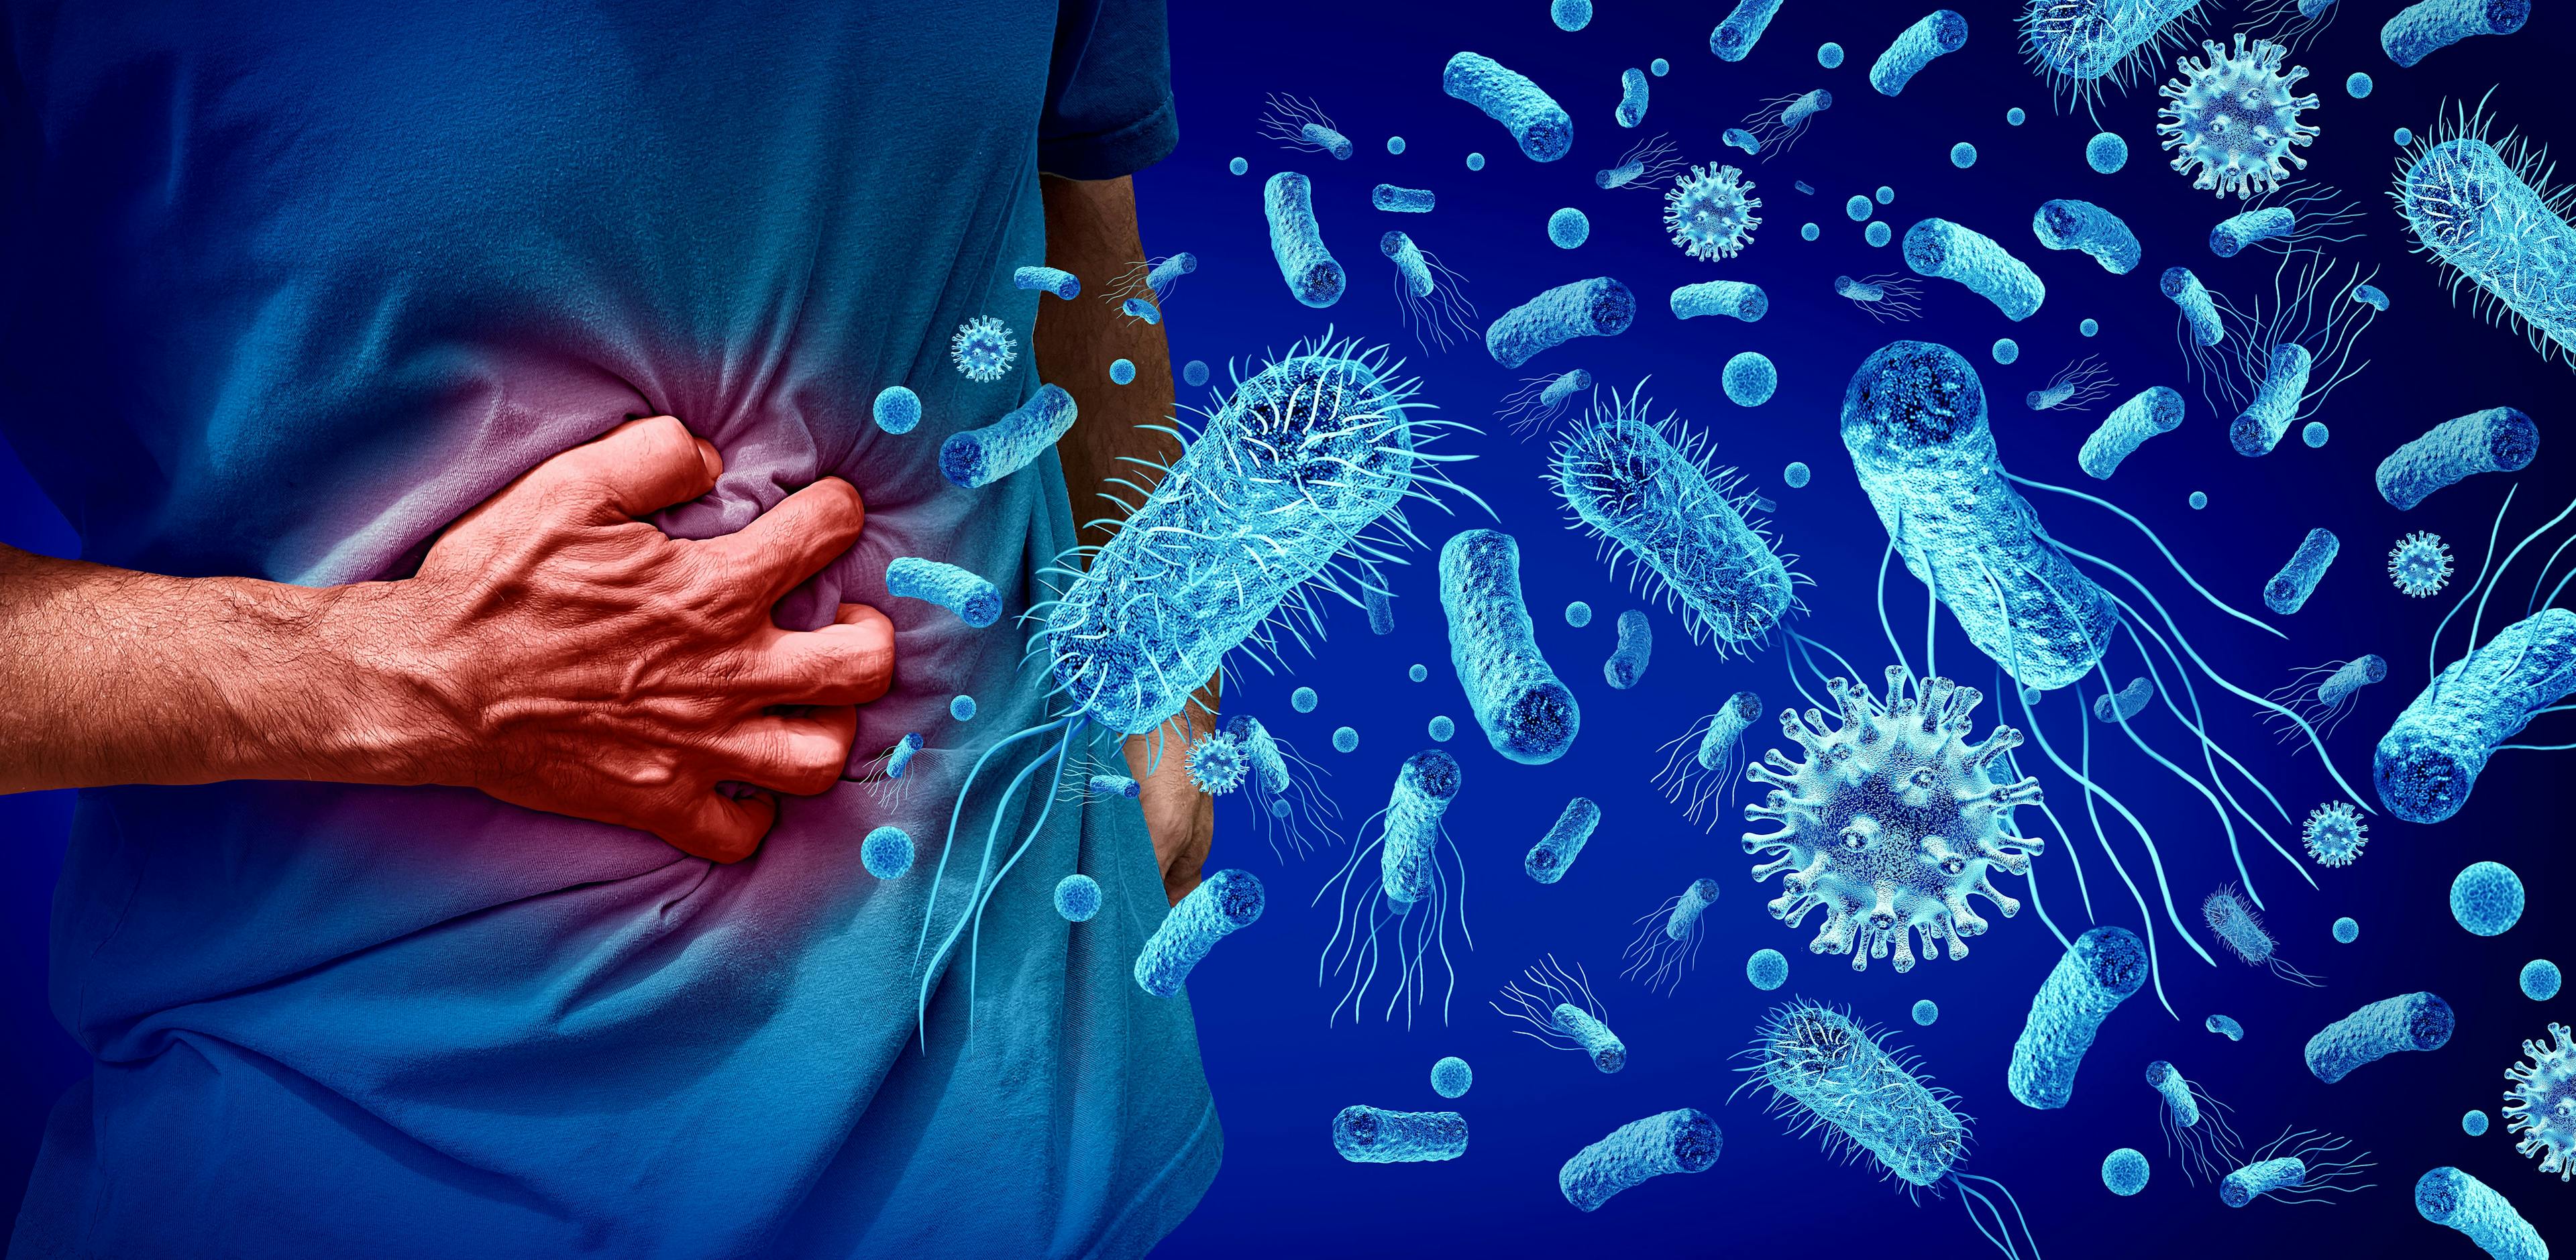 Foodborne Illness and Stomach Pains or stomachache with a painful digestive system ache as an abdominal illness or stomach infection | Image Credit: © freshidea - stock.adobe.com